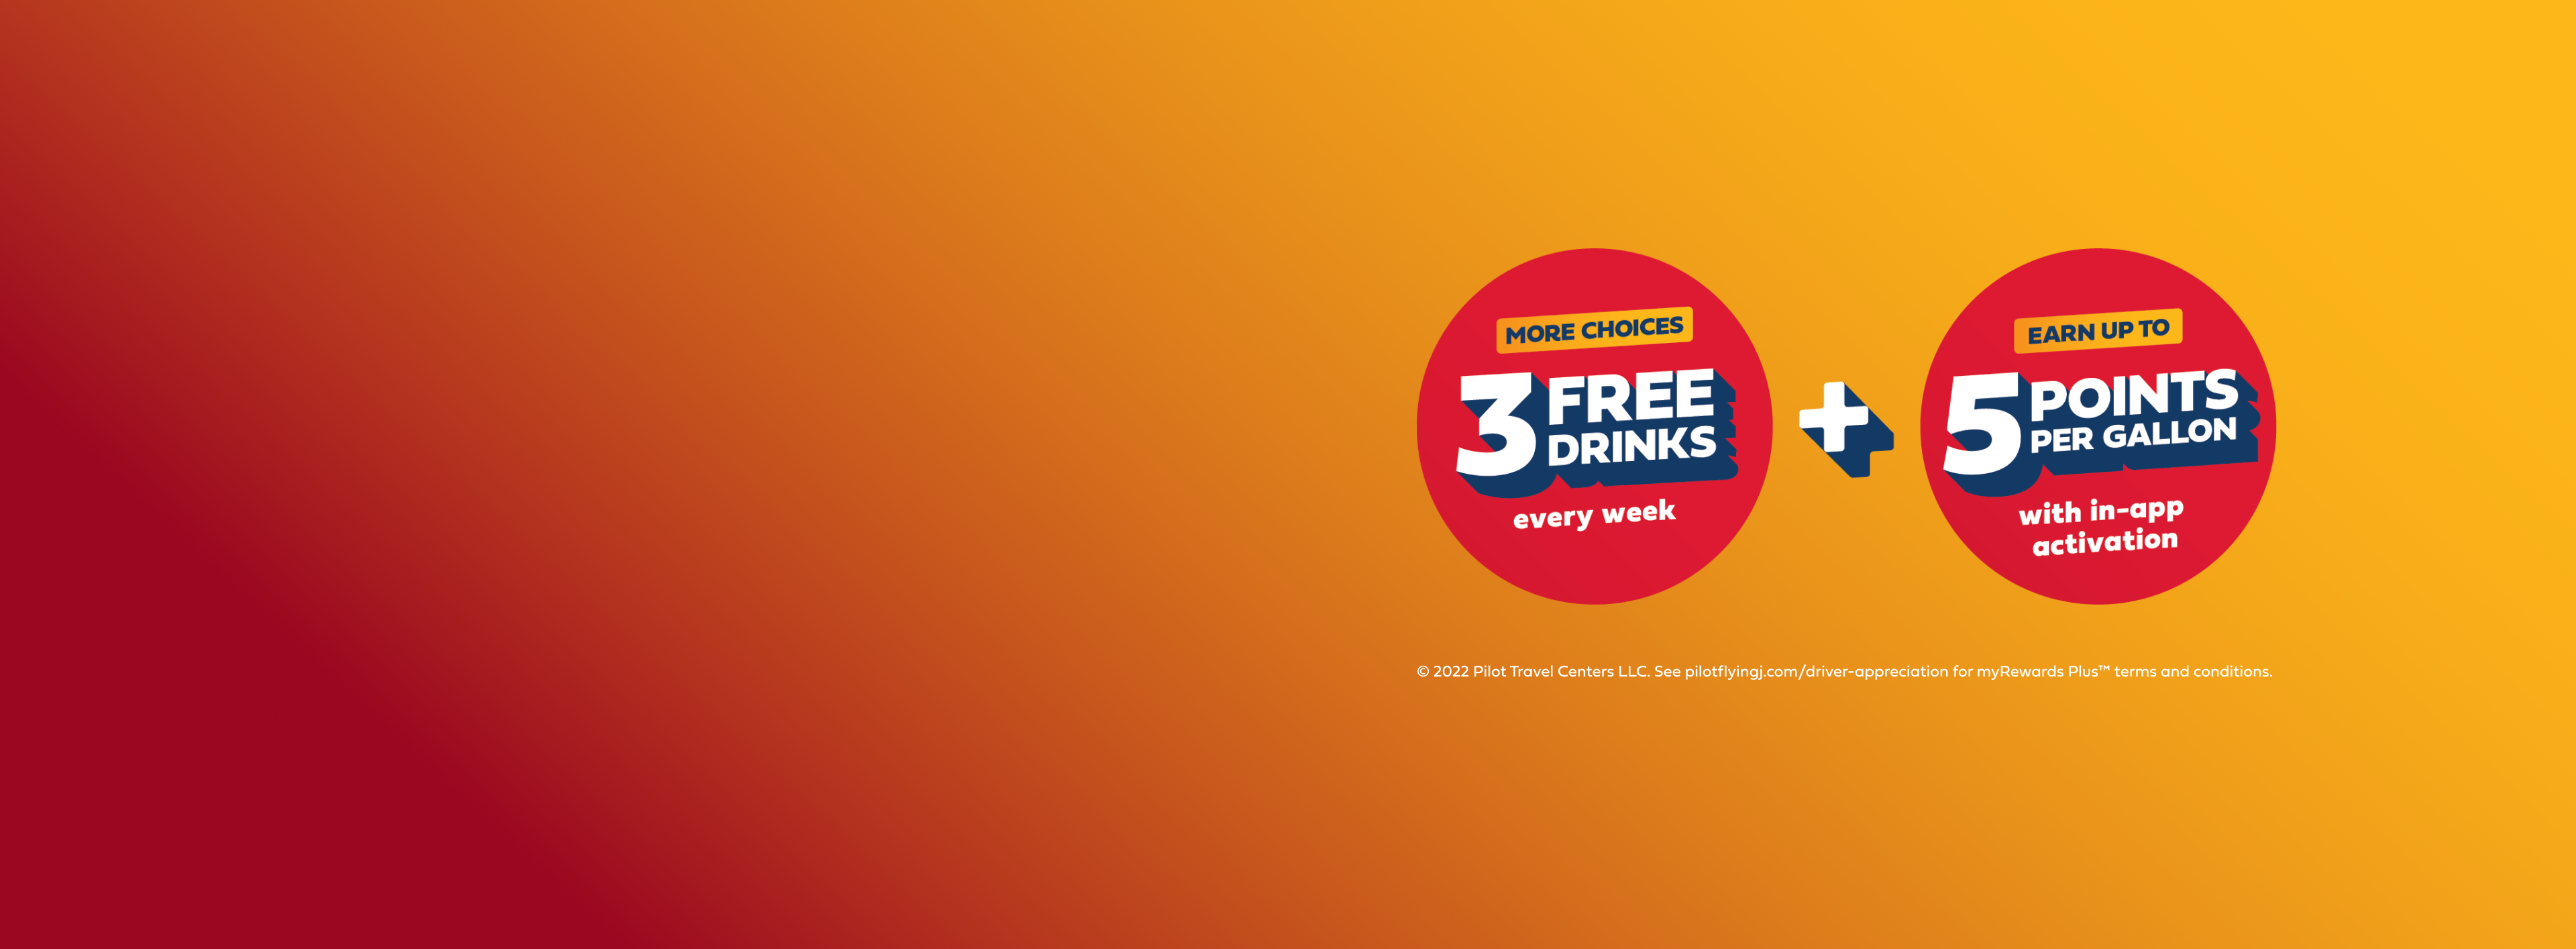 driver appreciation month - 3 free drinks a week plus earn 5 points per gallon all October long